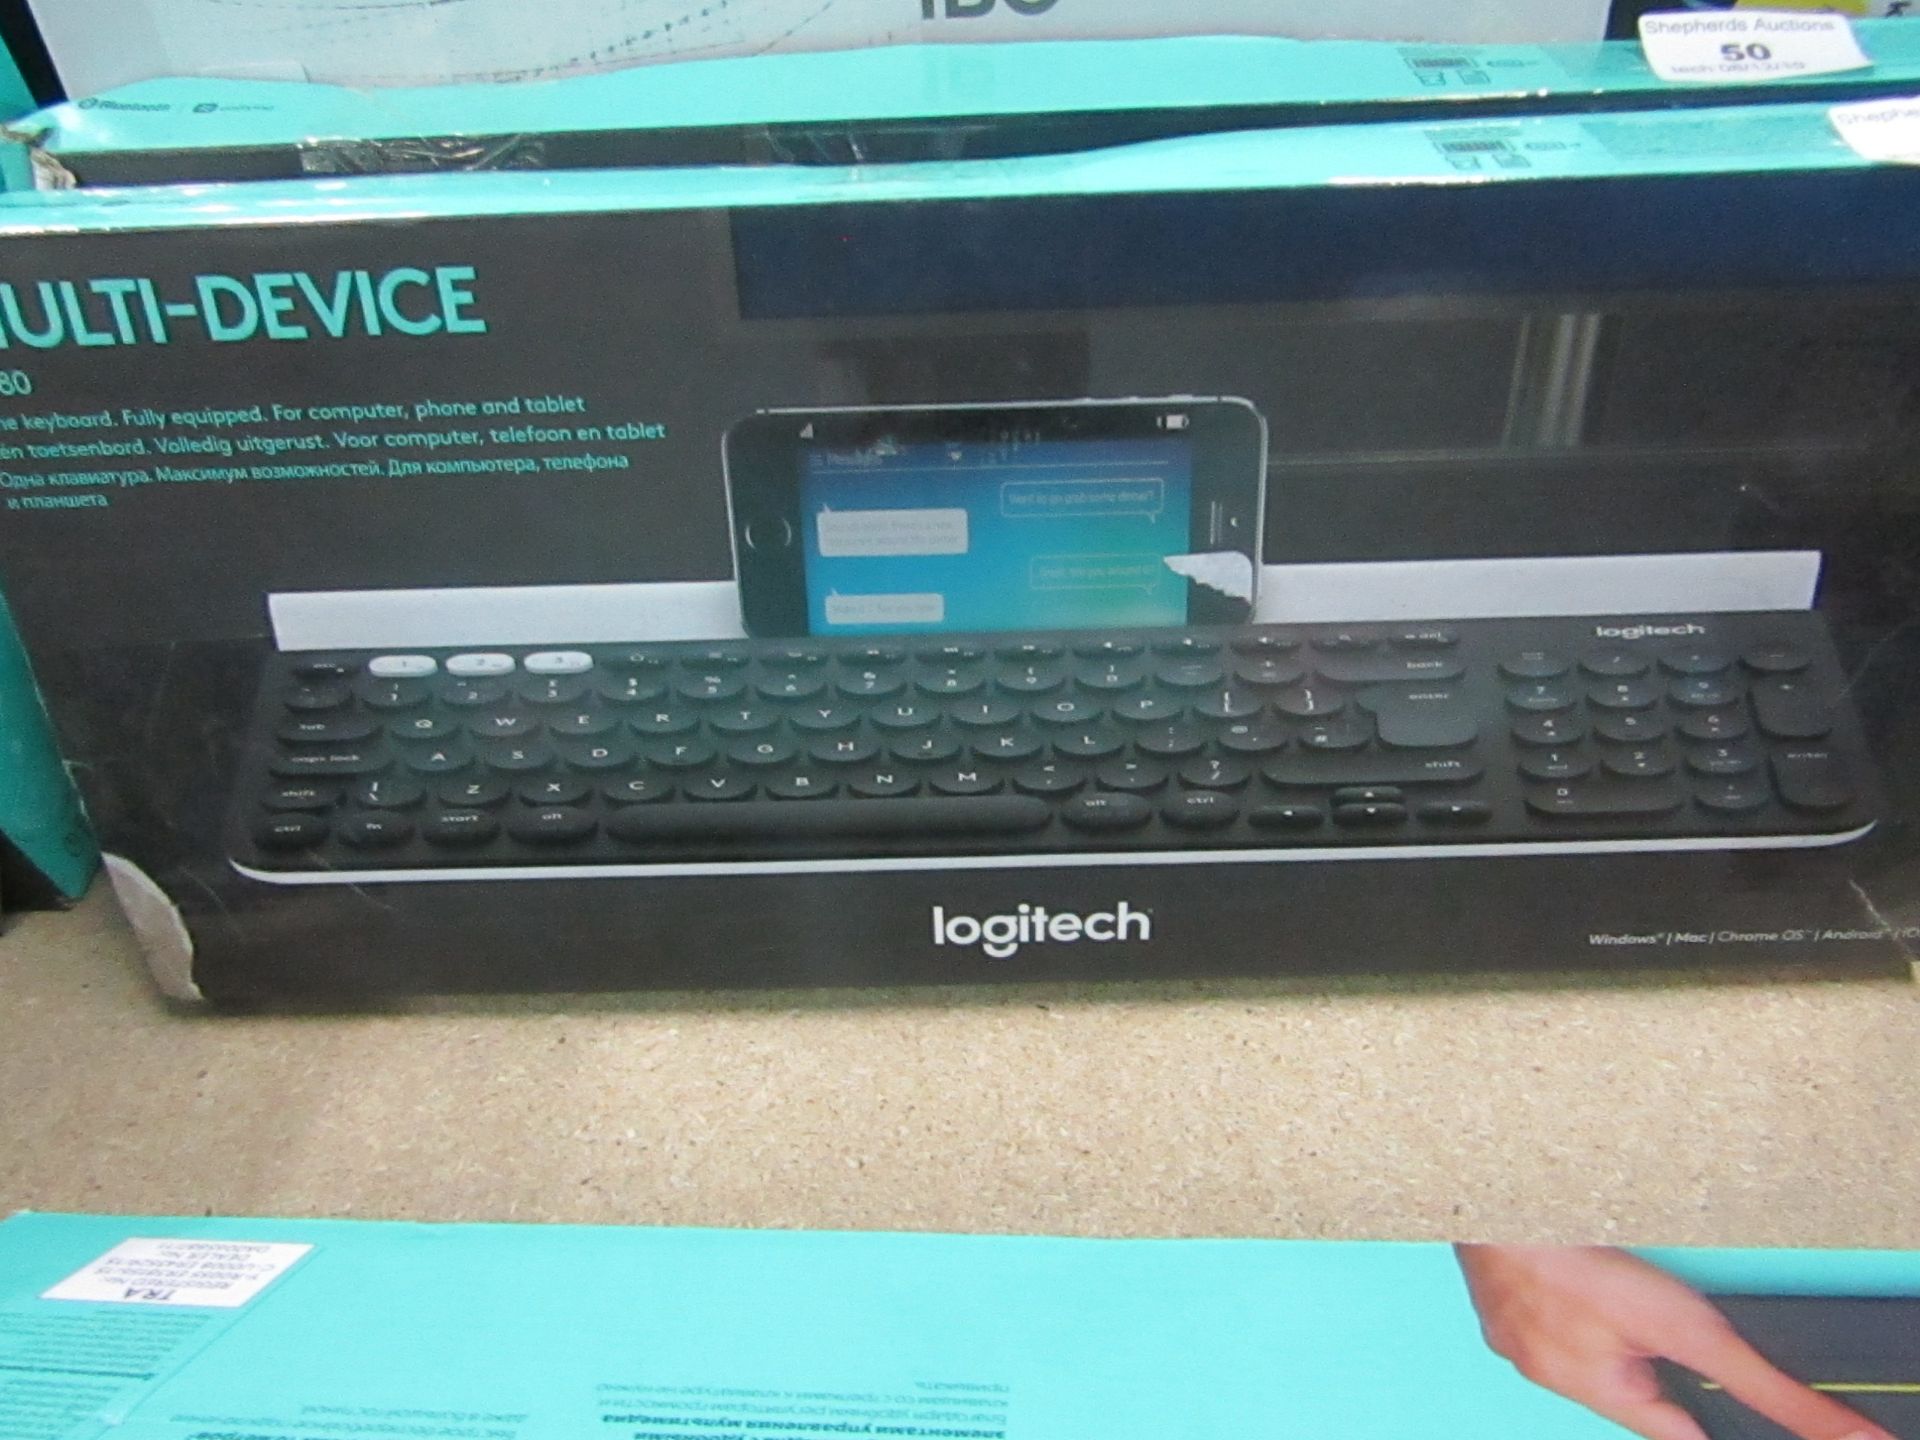 Logitech K780 multi-device keyboard, untested and boxed.